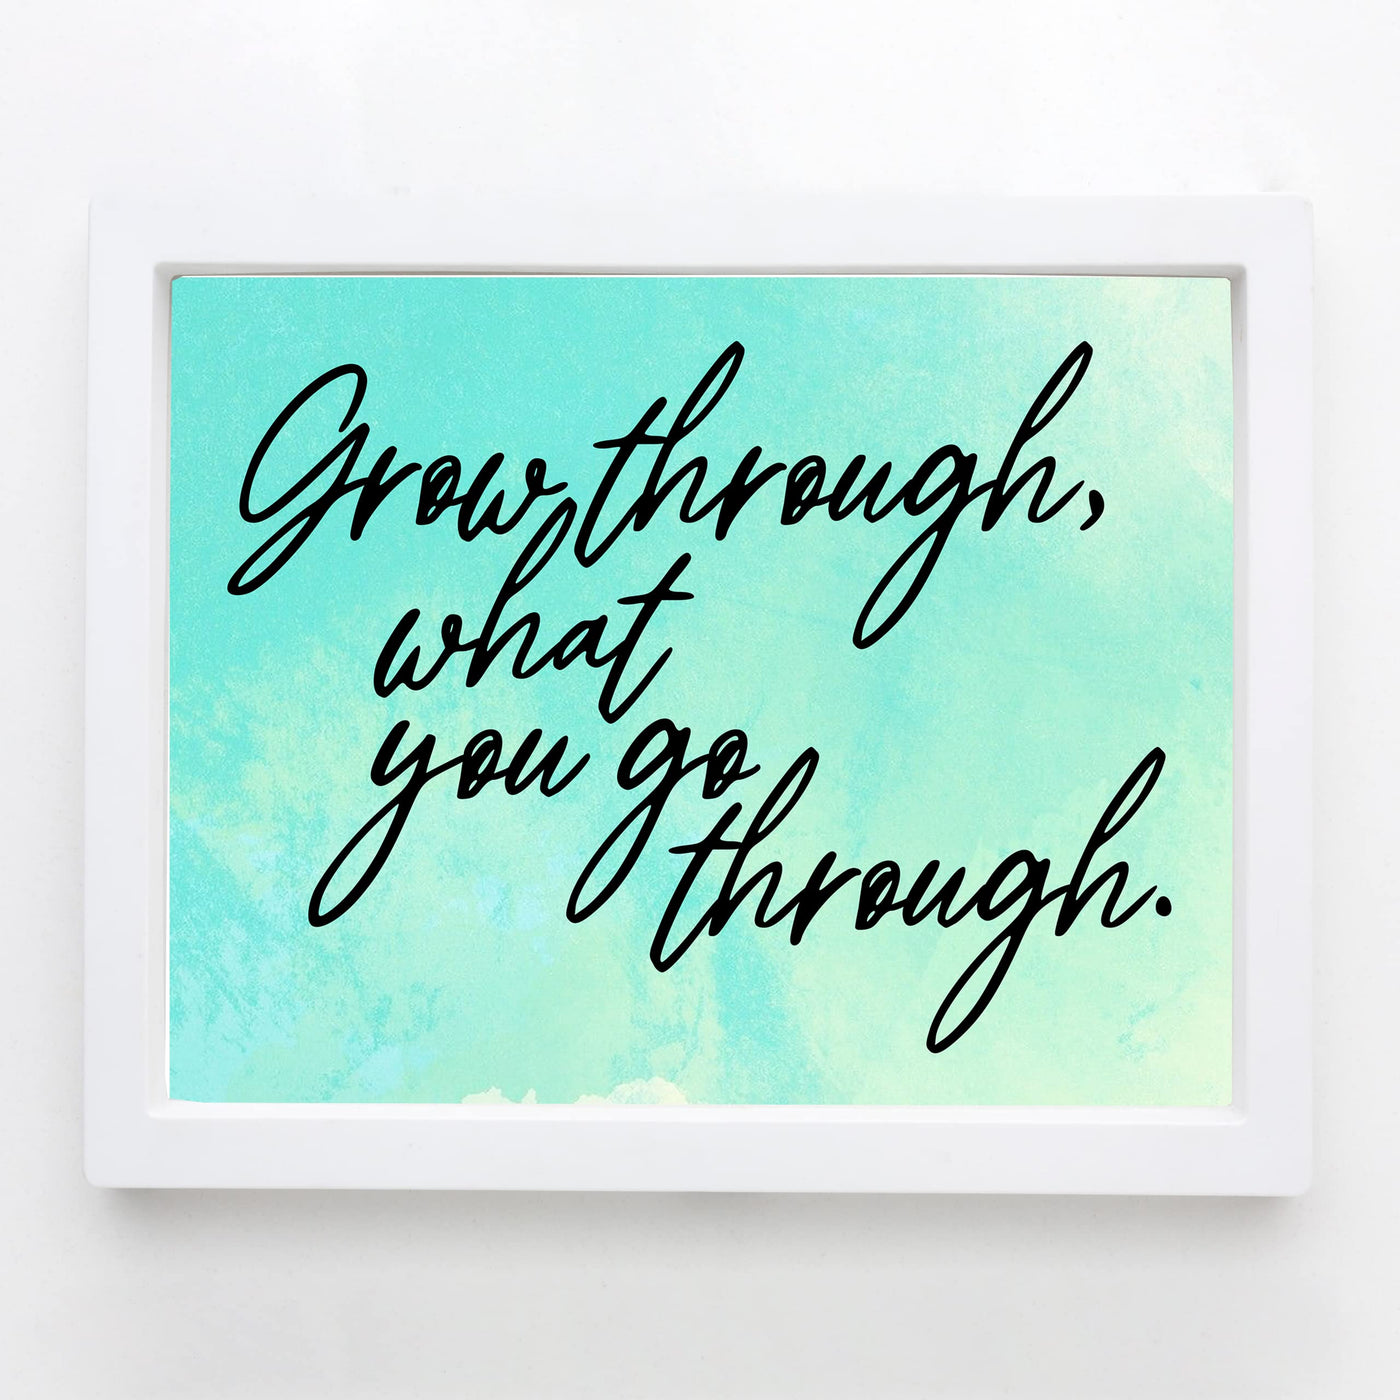 Grow Through What You Go Through Motivational Quotes Wall Decor Sign -10 x 8" Inspirational Replica Watercolor Art Print-Ready to Frame. Home-Office-Desk-School Decoration. Perfect for Motivation!